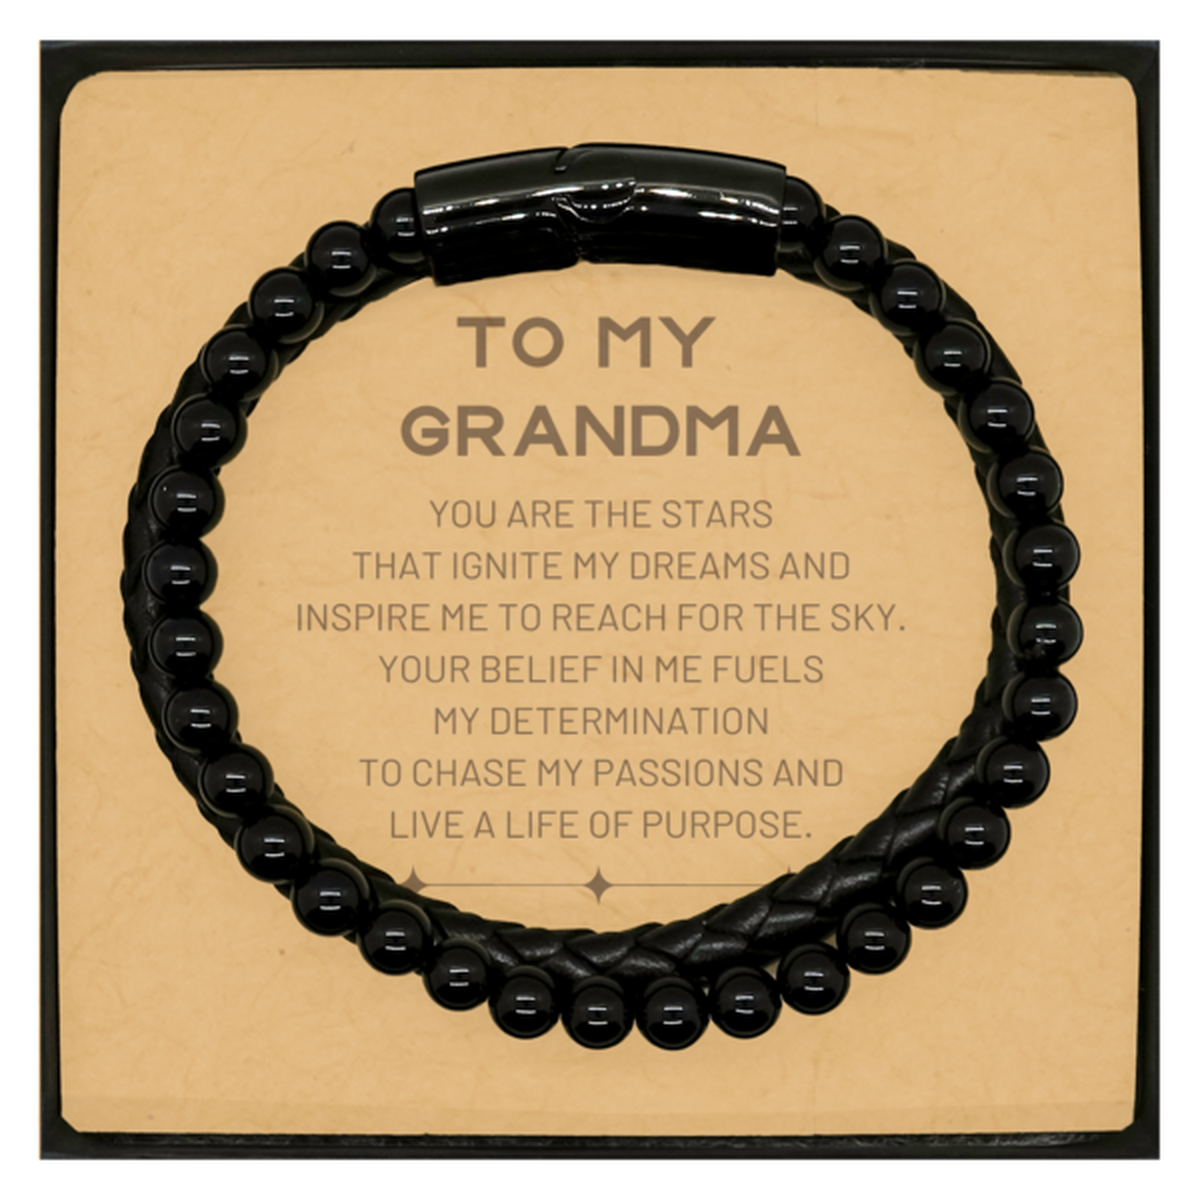 To My Grandma Stone Leather Bracelets, You are the stars that ignite my dreams and inspire me to reach for the sky, Birthday Christmas Unique Gifts For Grandma, Thank You Gifts For Grandma